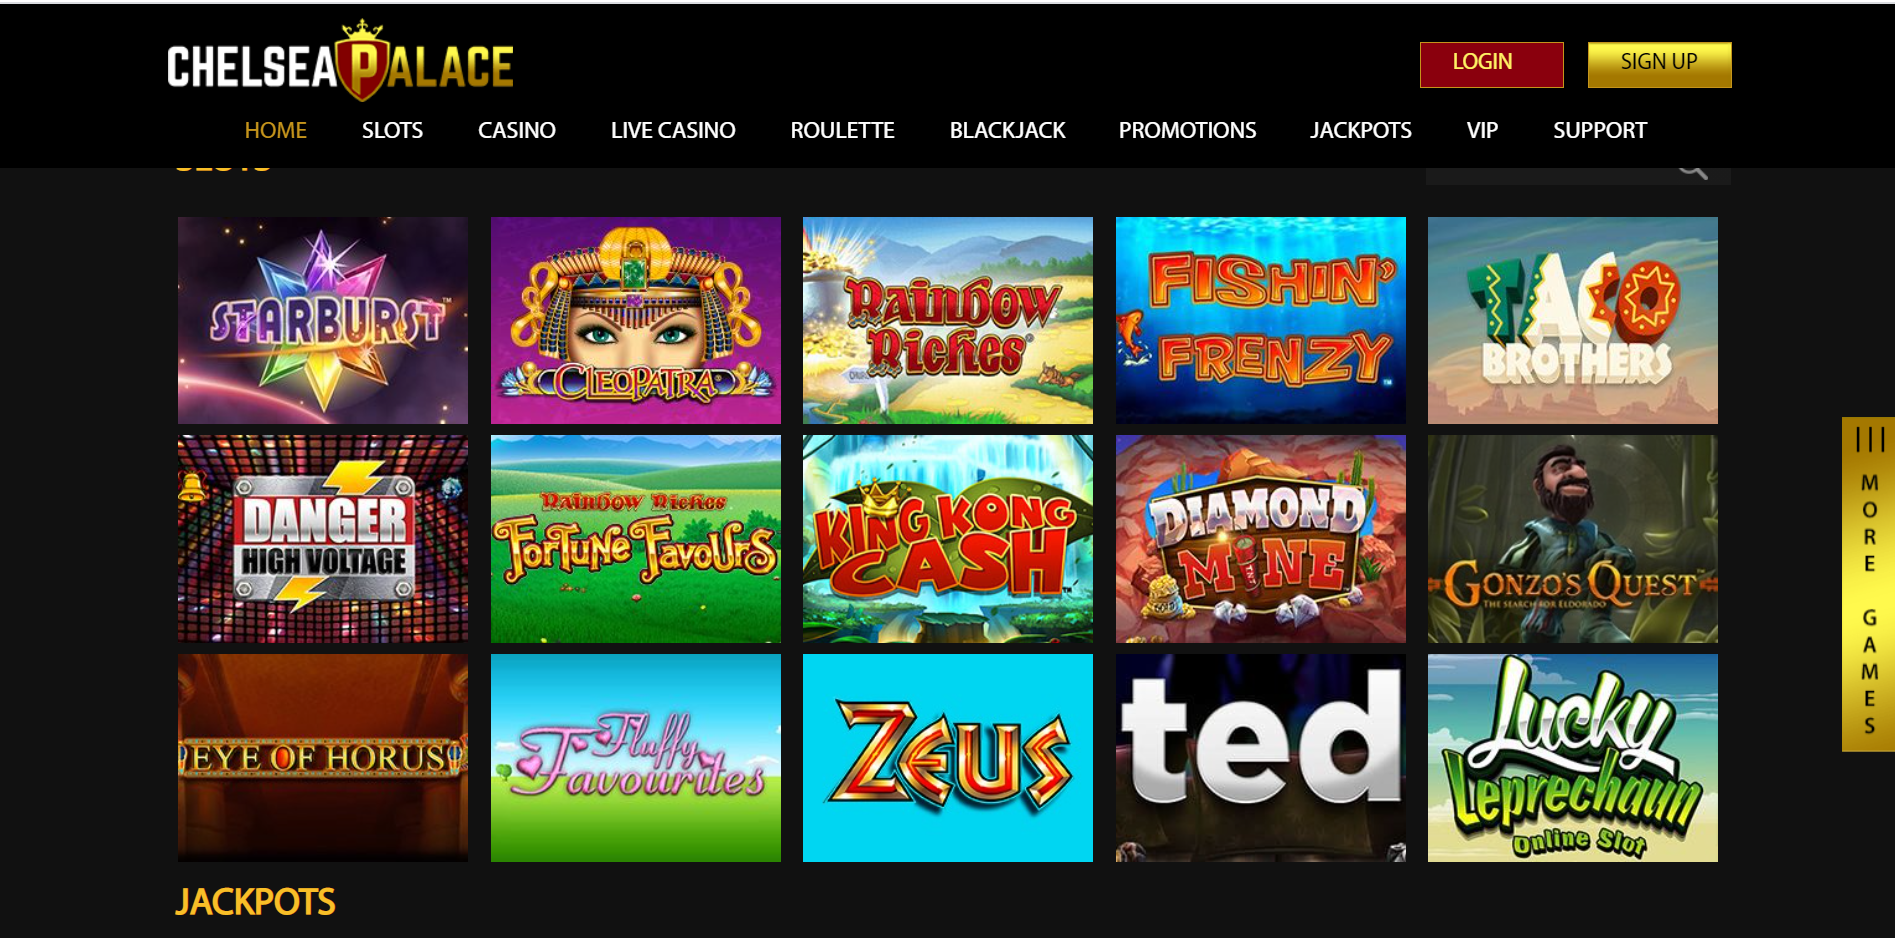 Chelsea Palace Casino Games